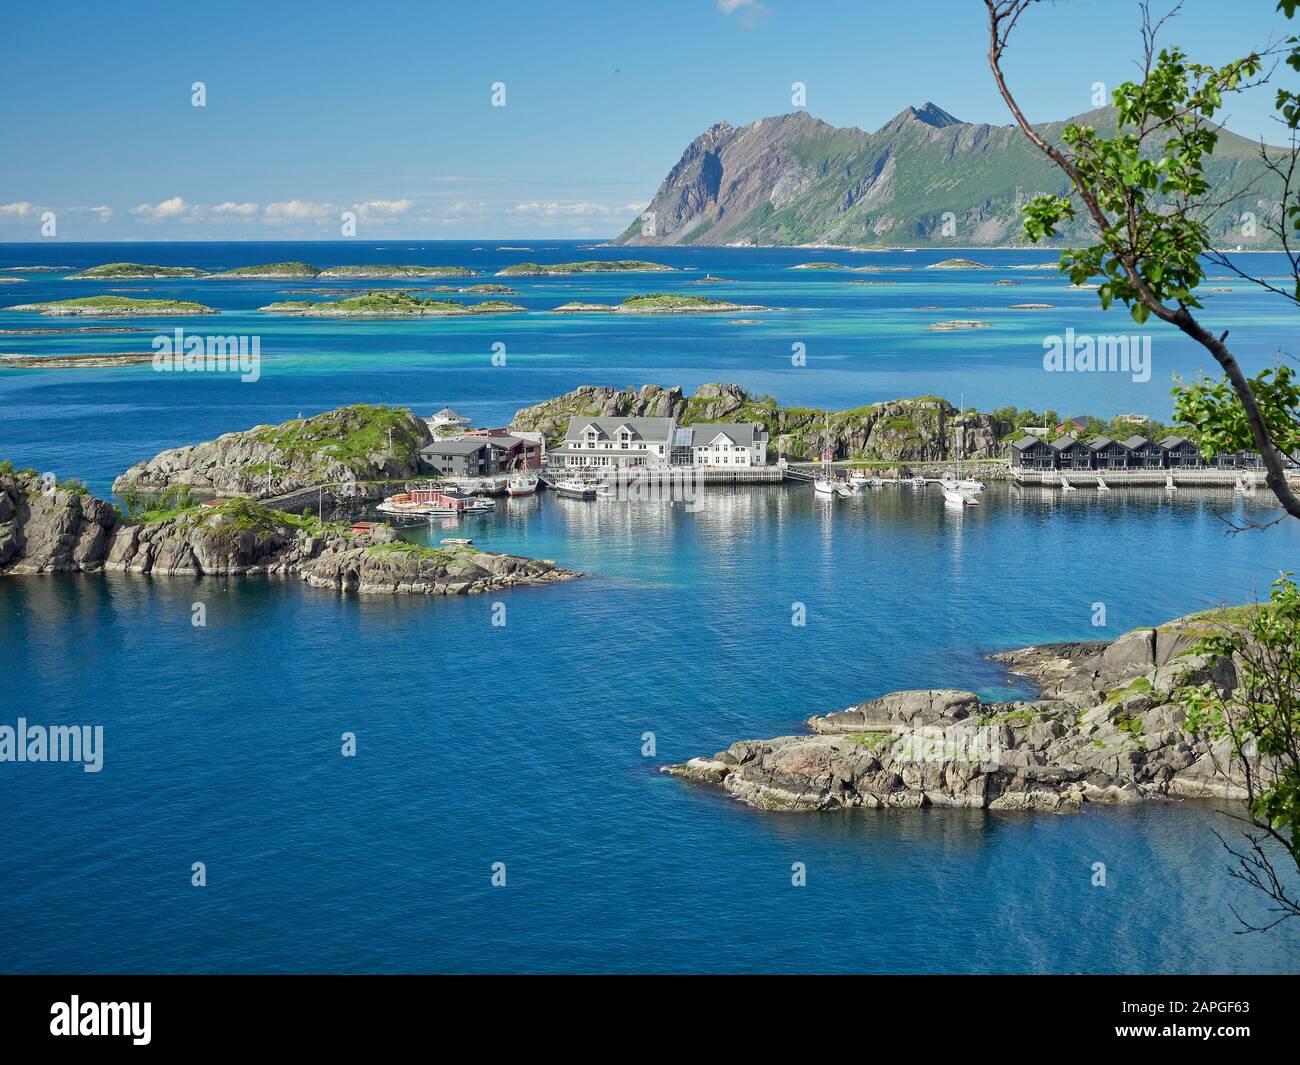 Fjord seascape view at the famous tourist attraction Hamn Village, Senja island, Troms county - Norway Stock Photo